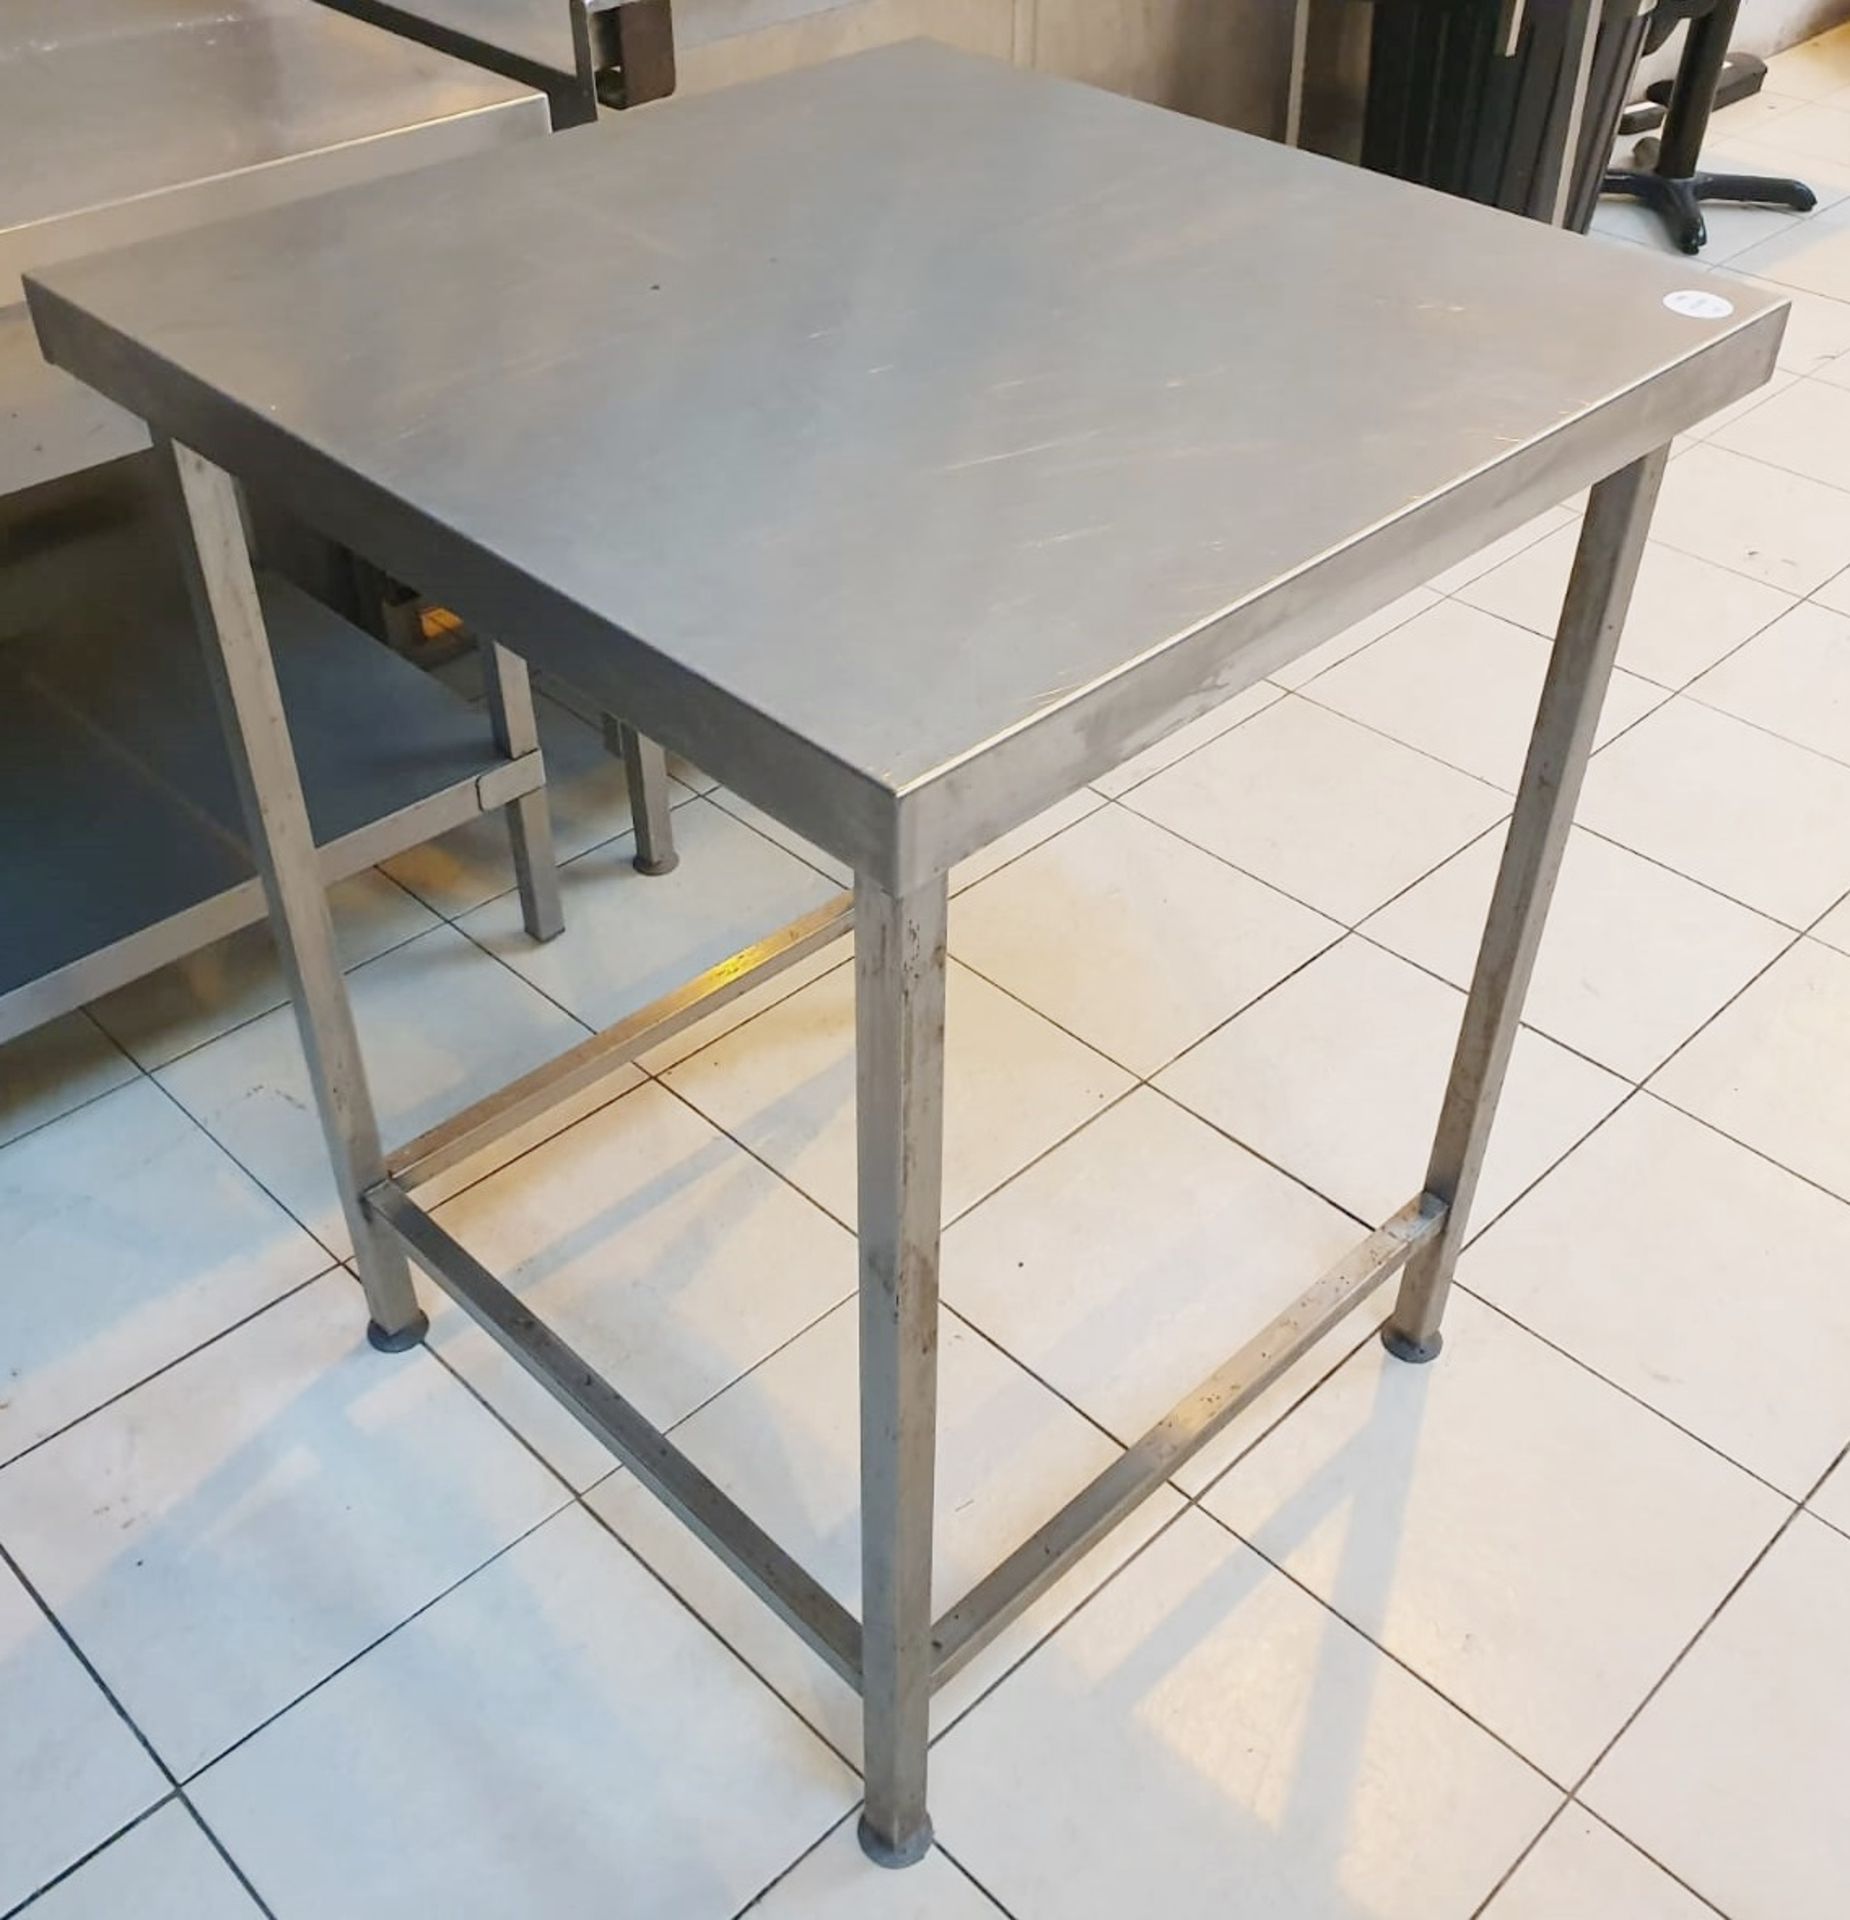 1 x Stainless Steel Square Prep Table - Dimensions: 70cm x 70 x h90cm **£5 Start - No Reserve** - Image 2 of 2